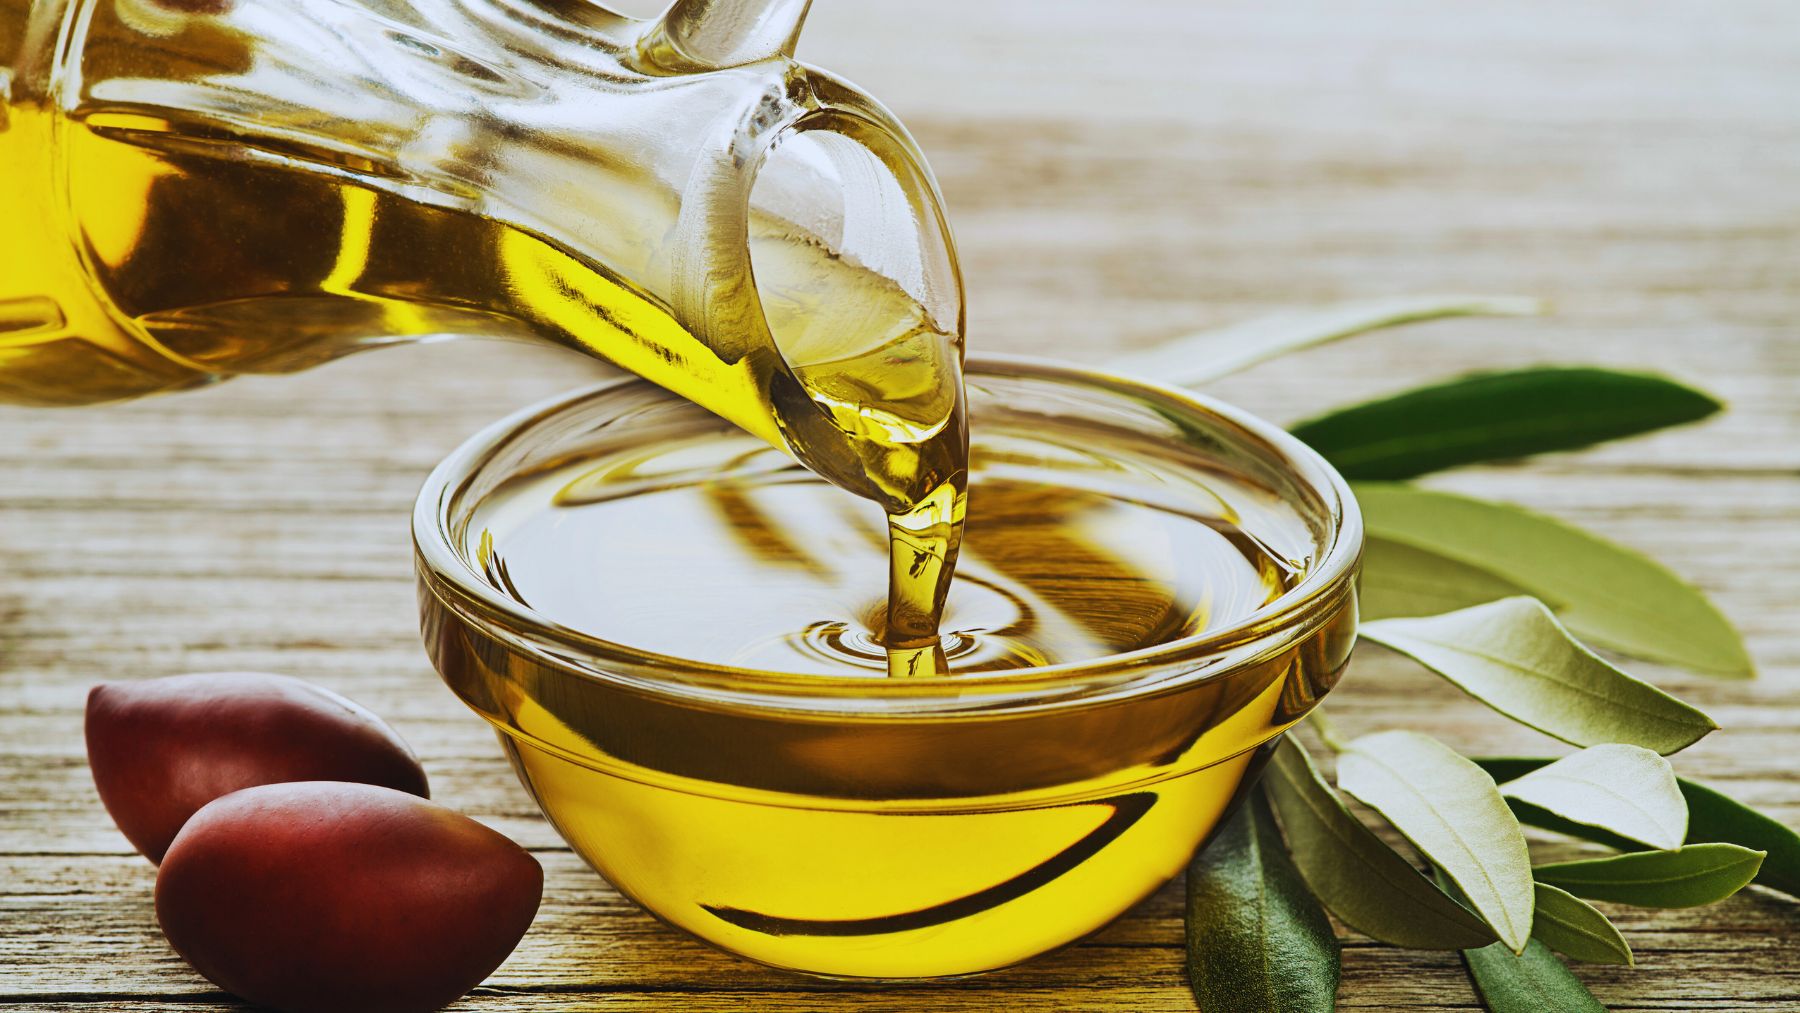 These are the benefits of olive oil for health